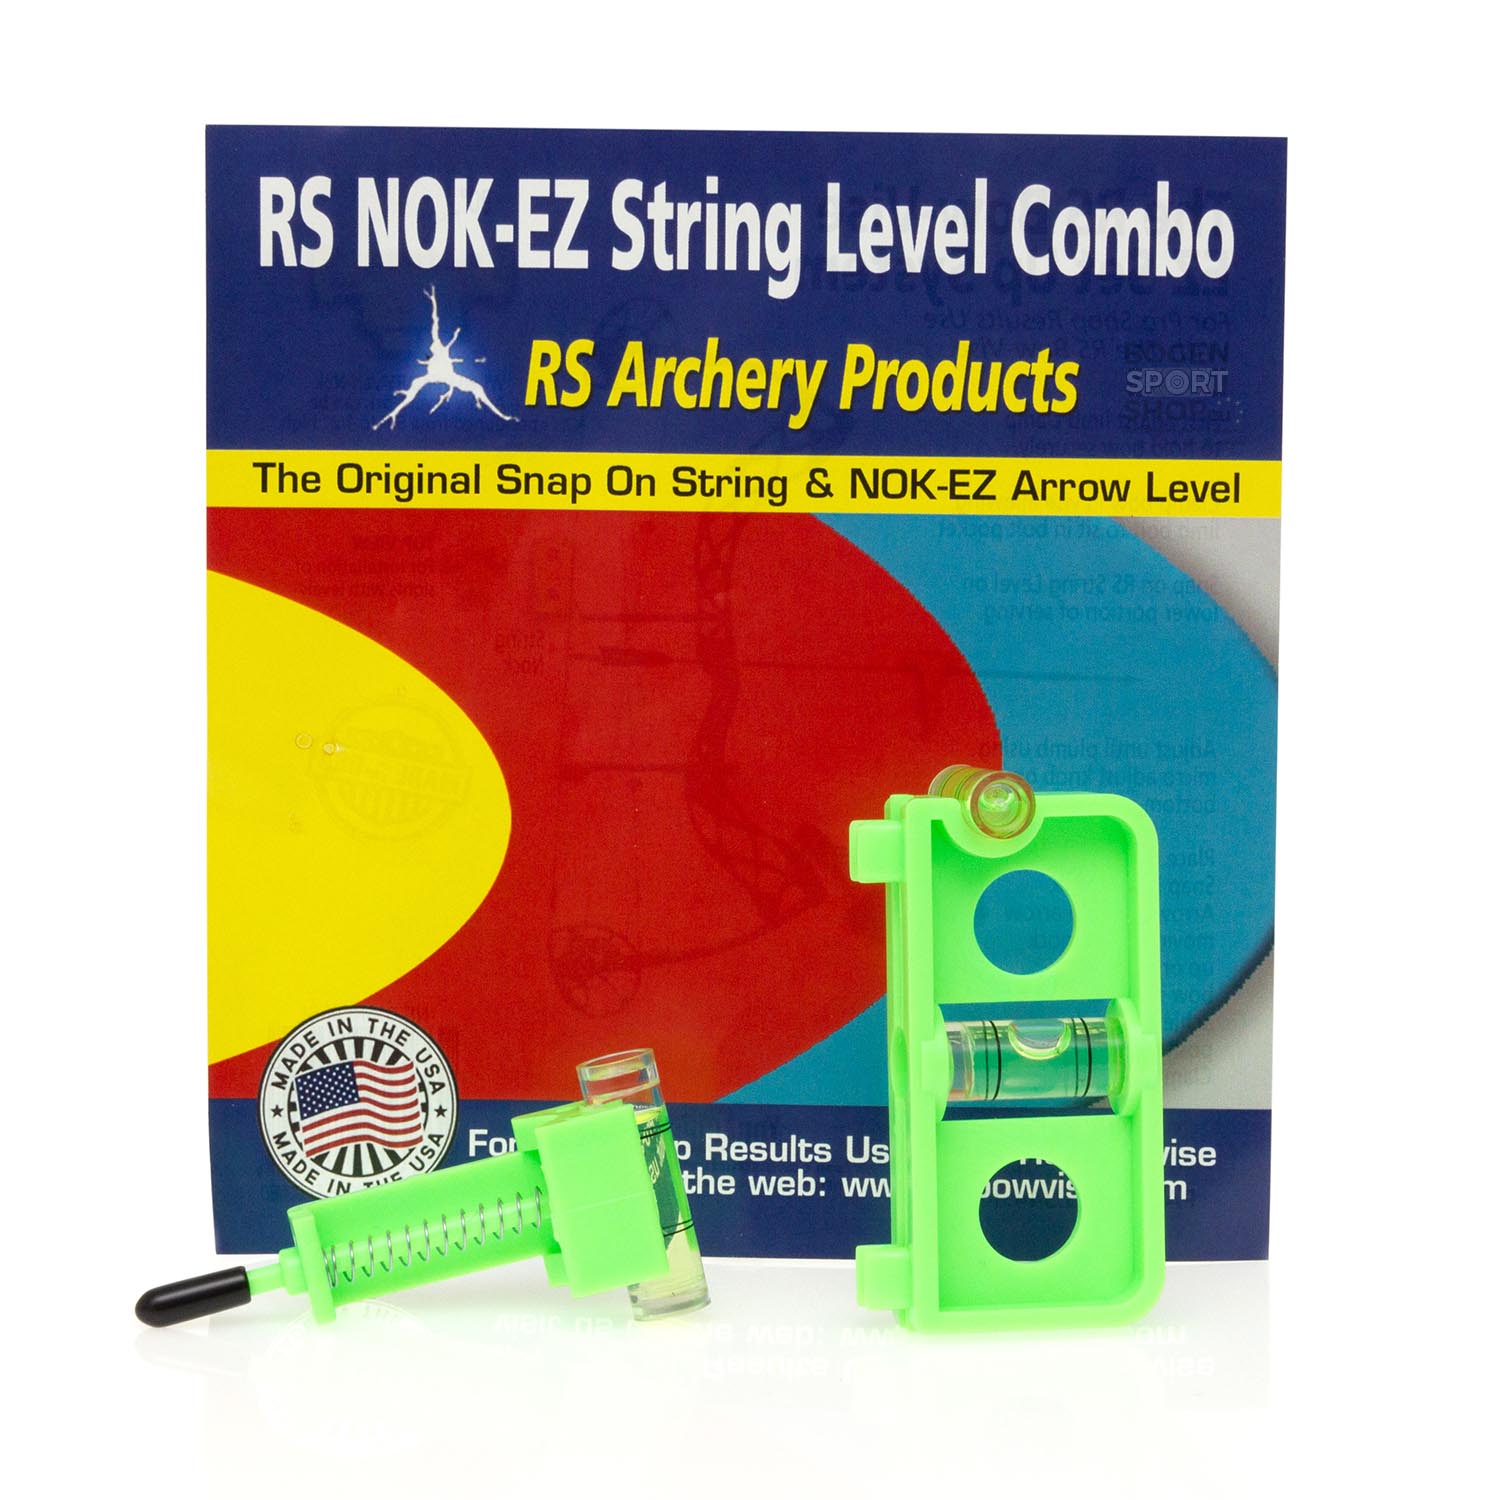  Buy RS Archery Products NOK-EZ & String Level Combo  online